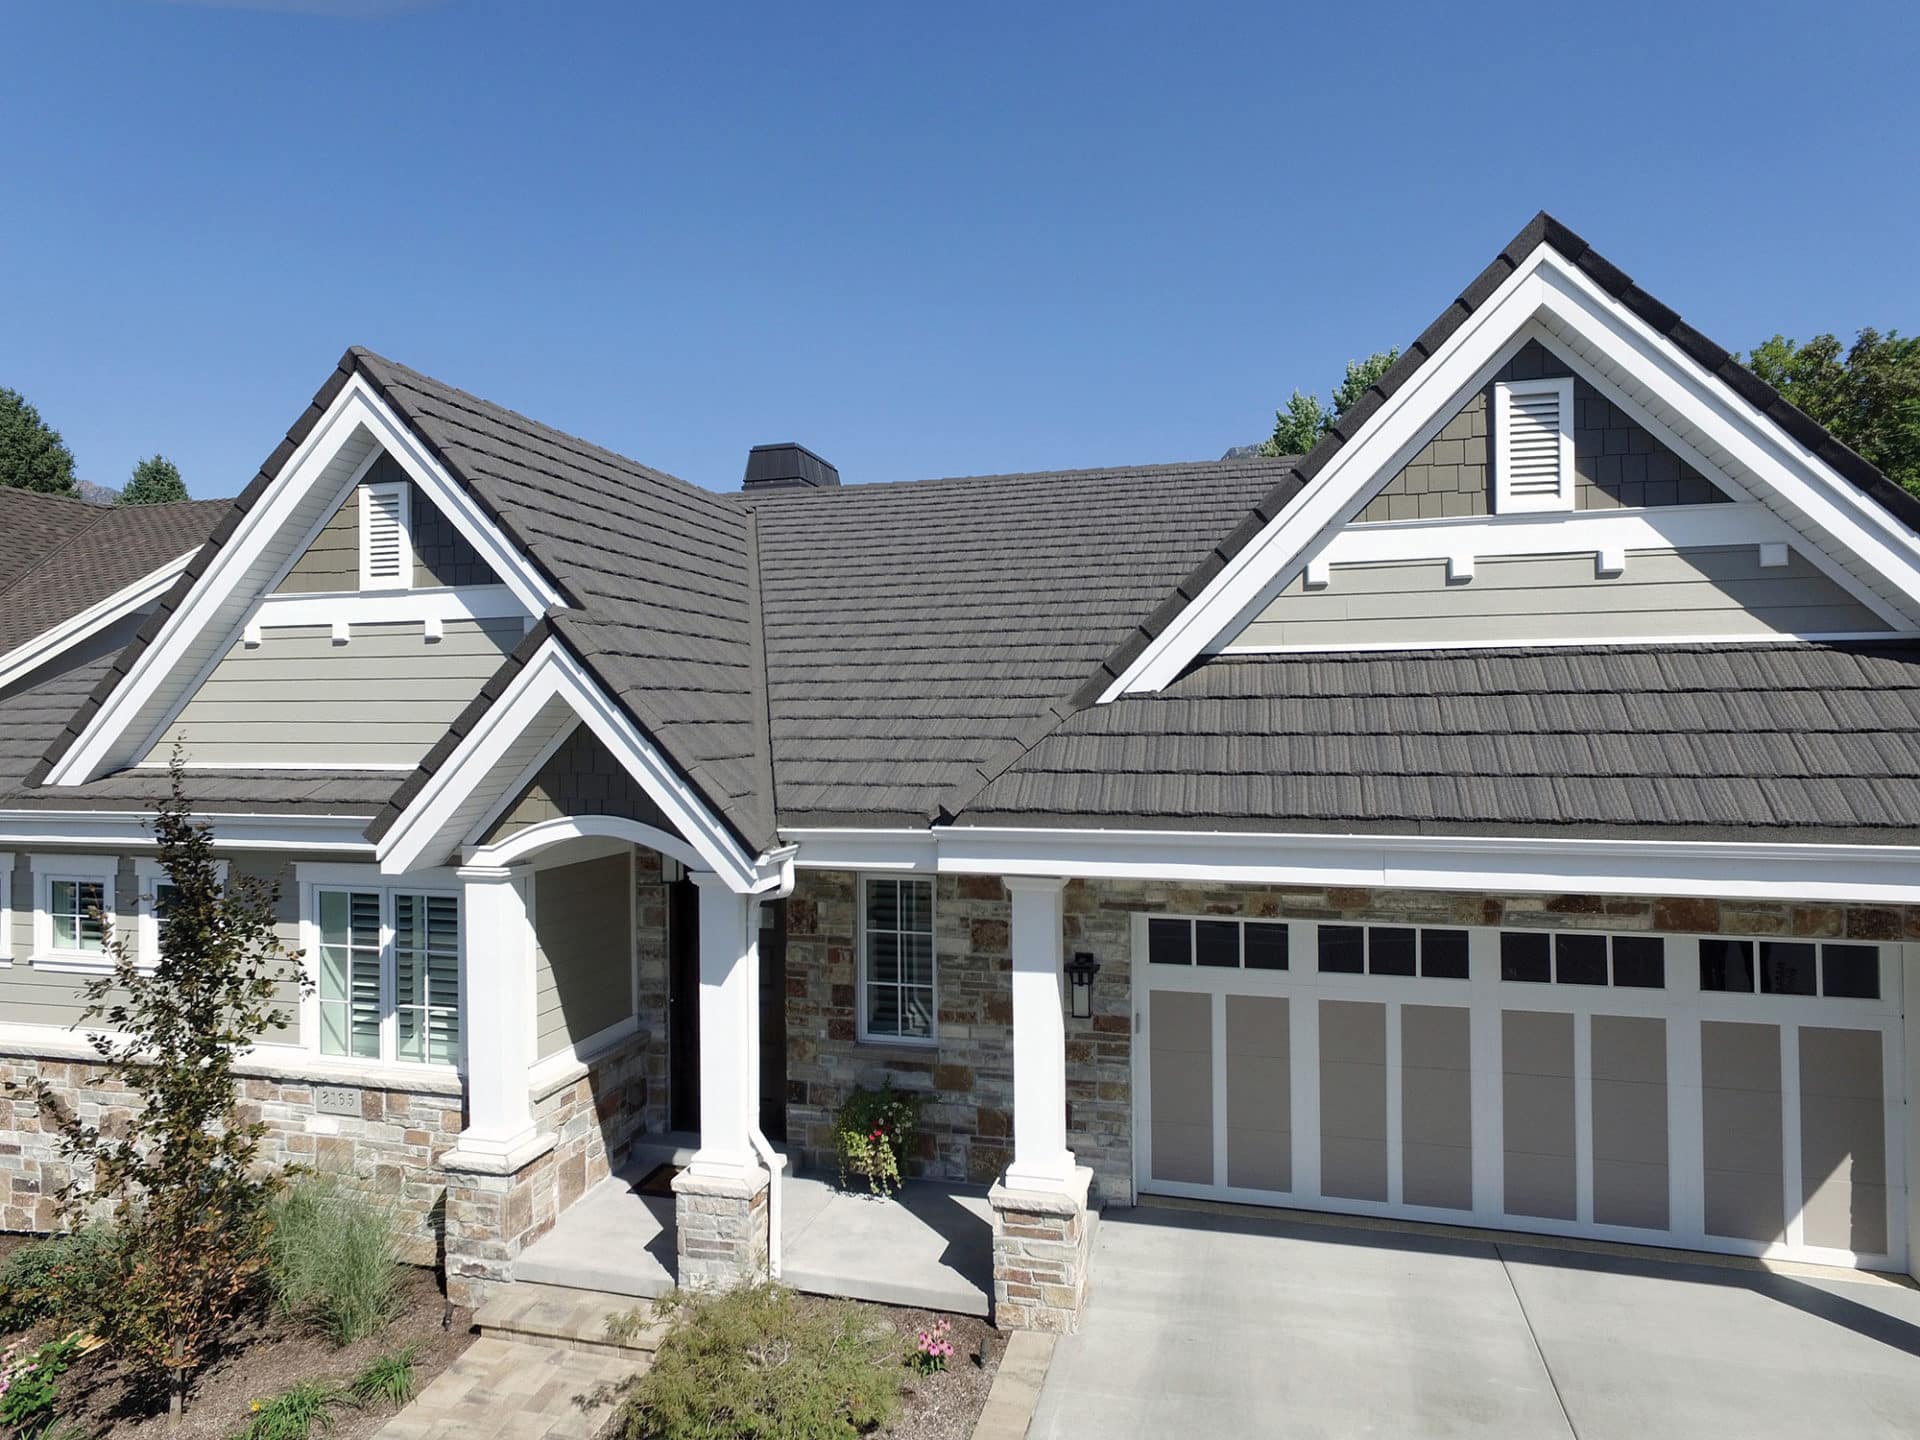 Metal Slate or Stone Coated Roof costs